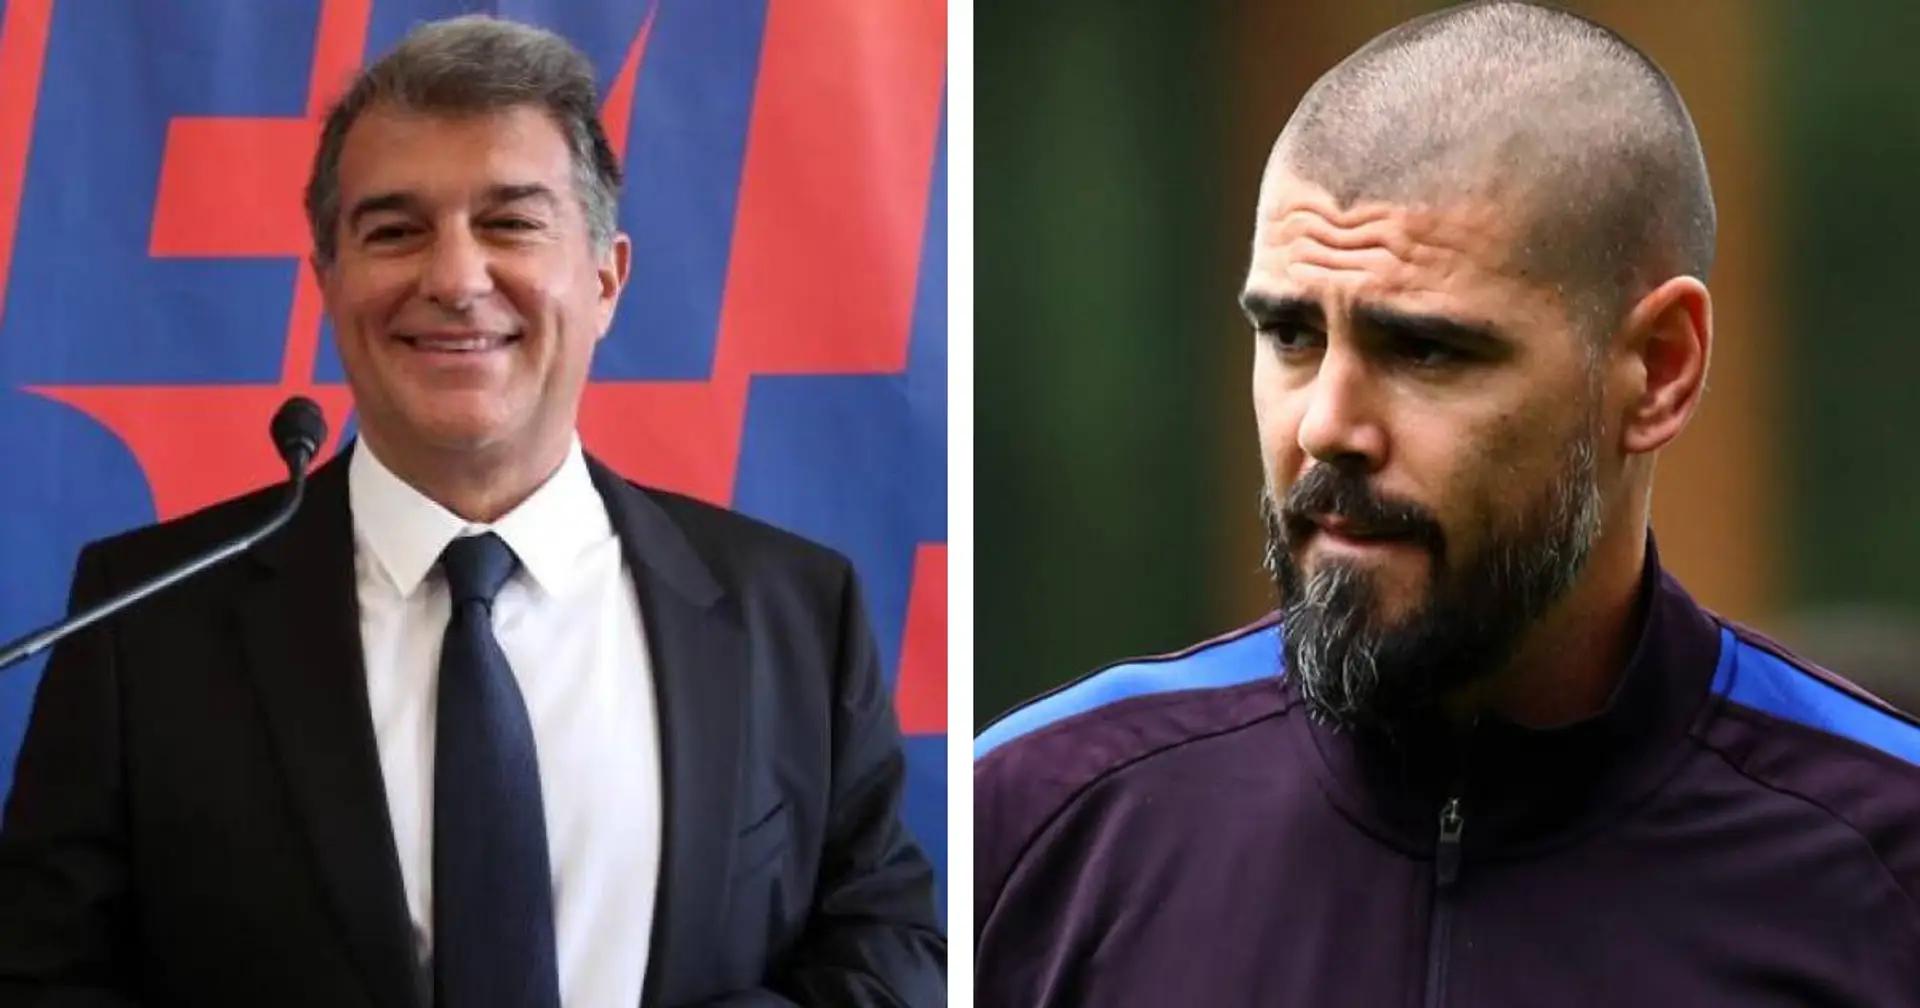 Victor Valdes set to return to Barcelona if Joan Laporta elected president